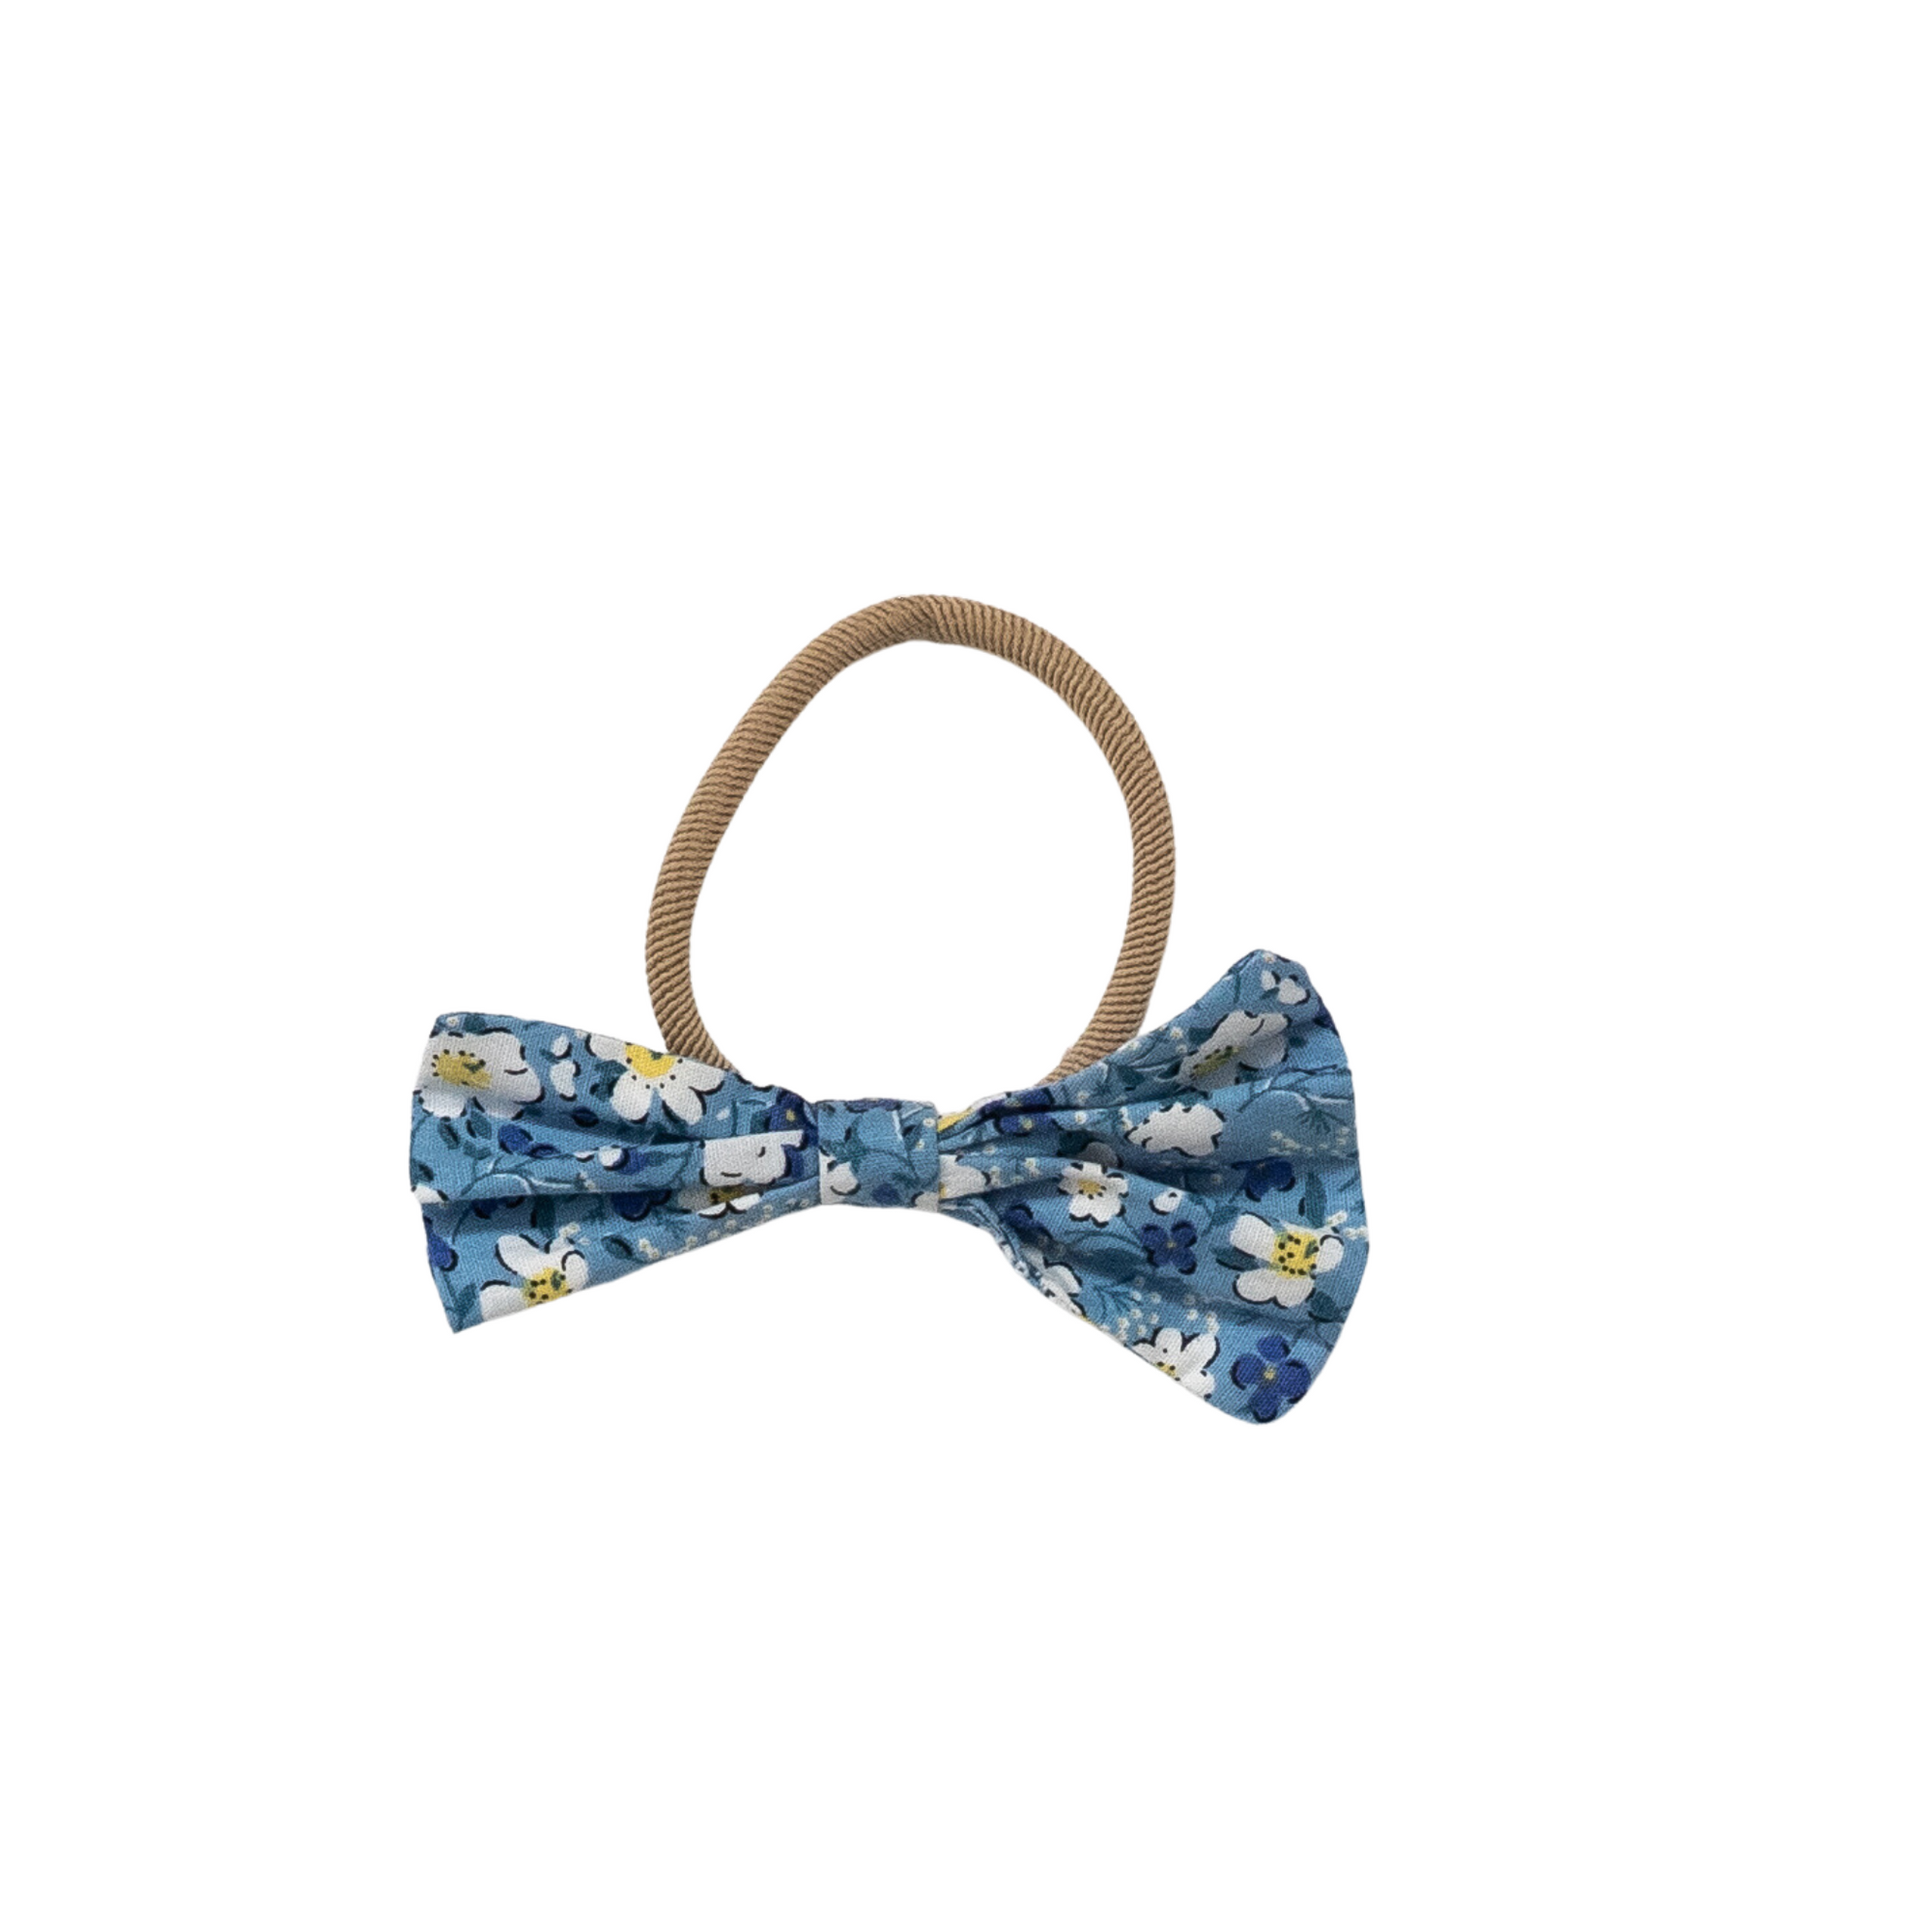 Smox Rox Set of 2 Sunny Hair Elastic Bows - Yellow and Blue Florals